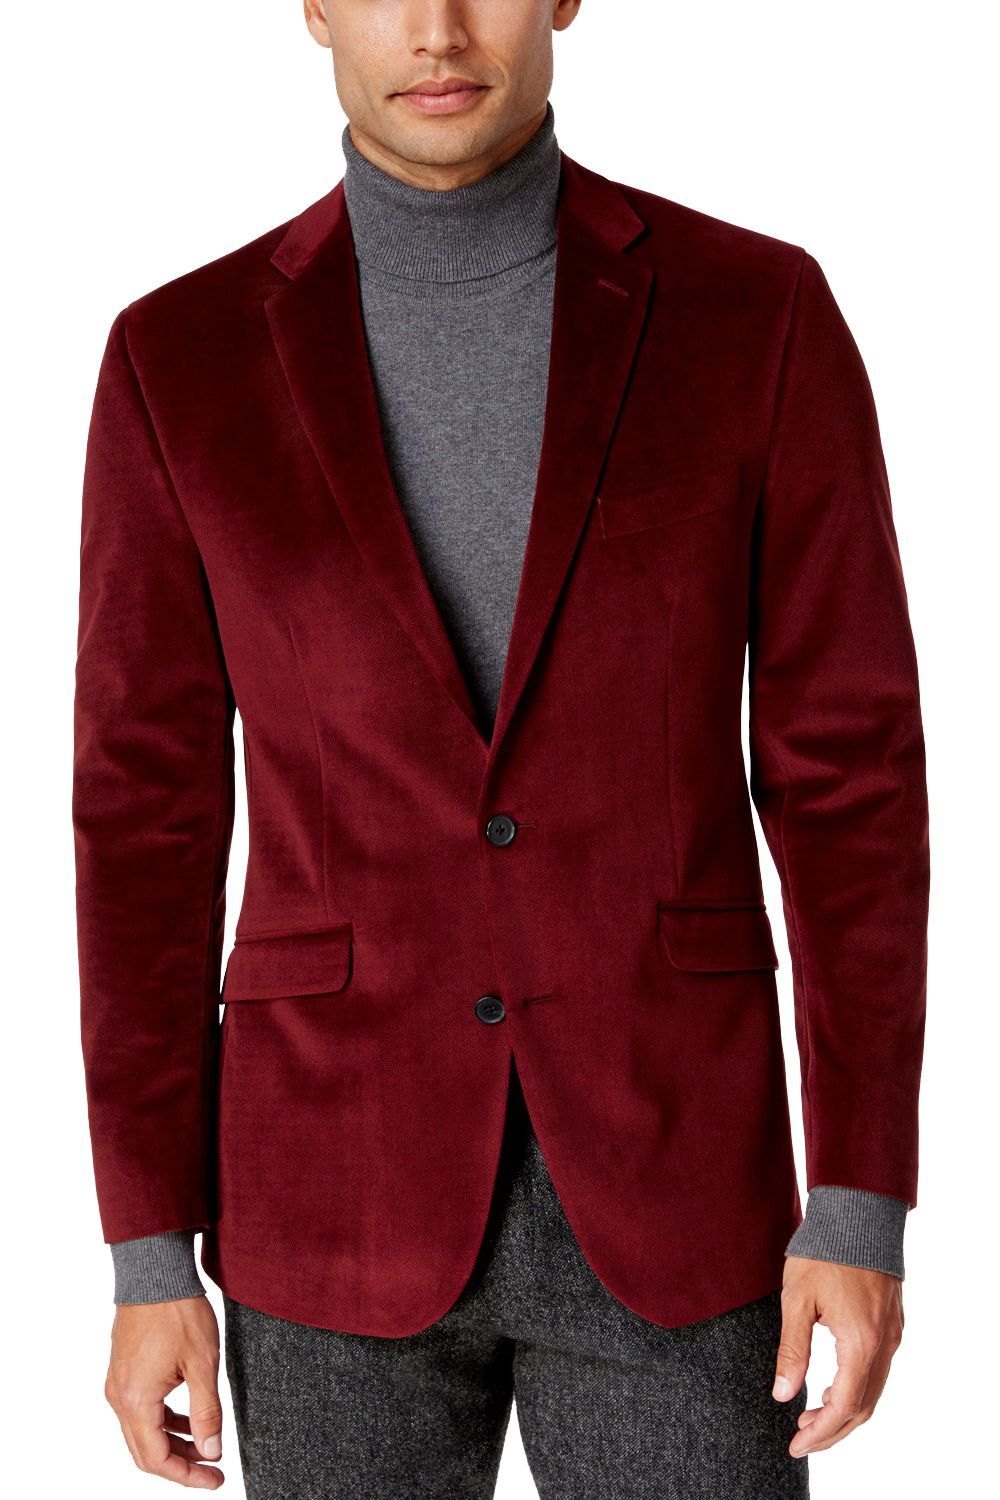 Buy Blazers for Men Online | Formal, Festive and Casual Blazers